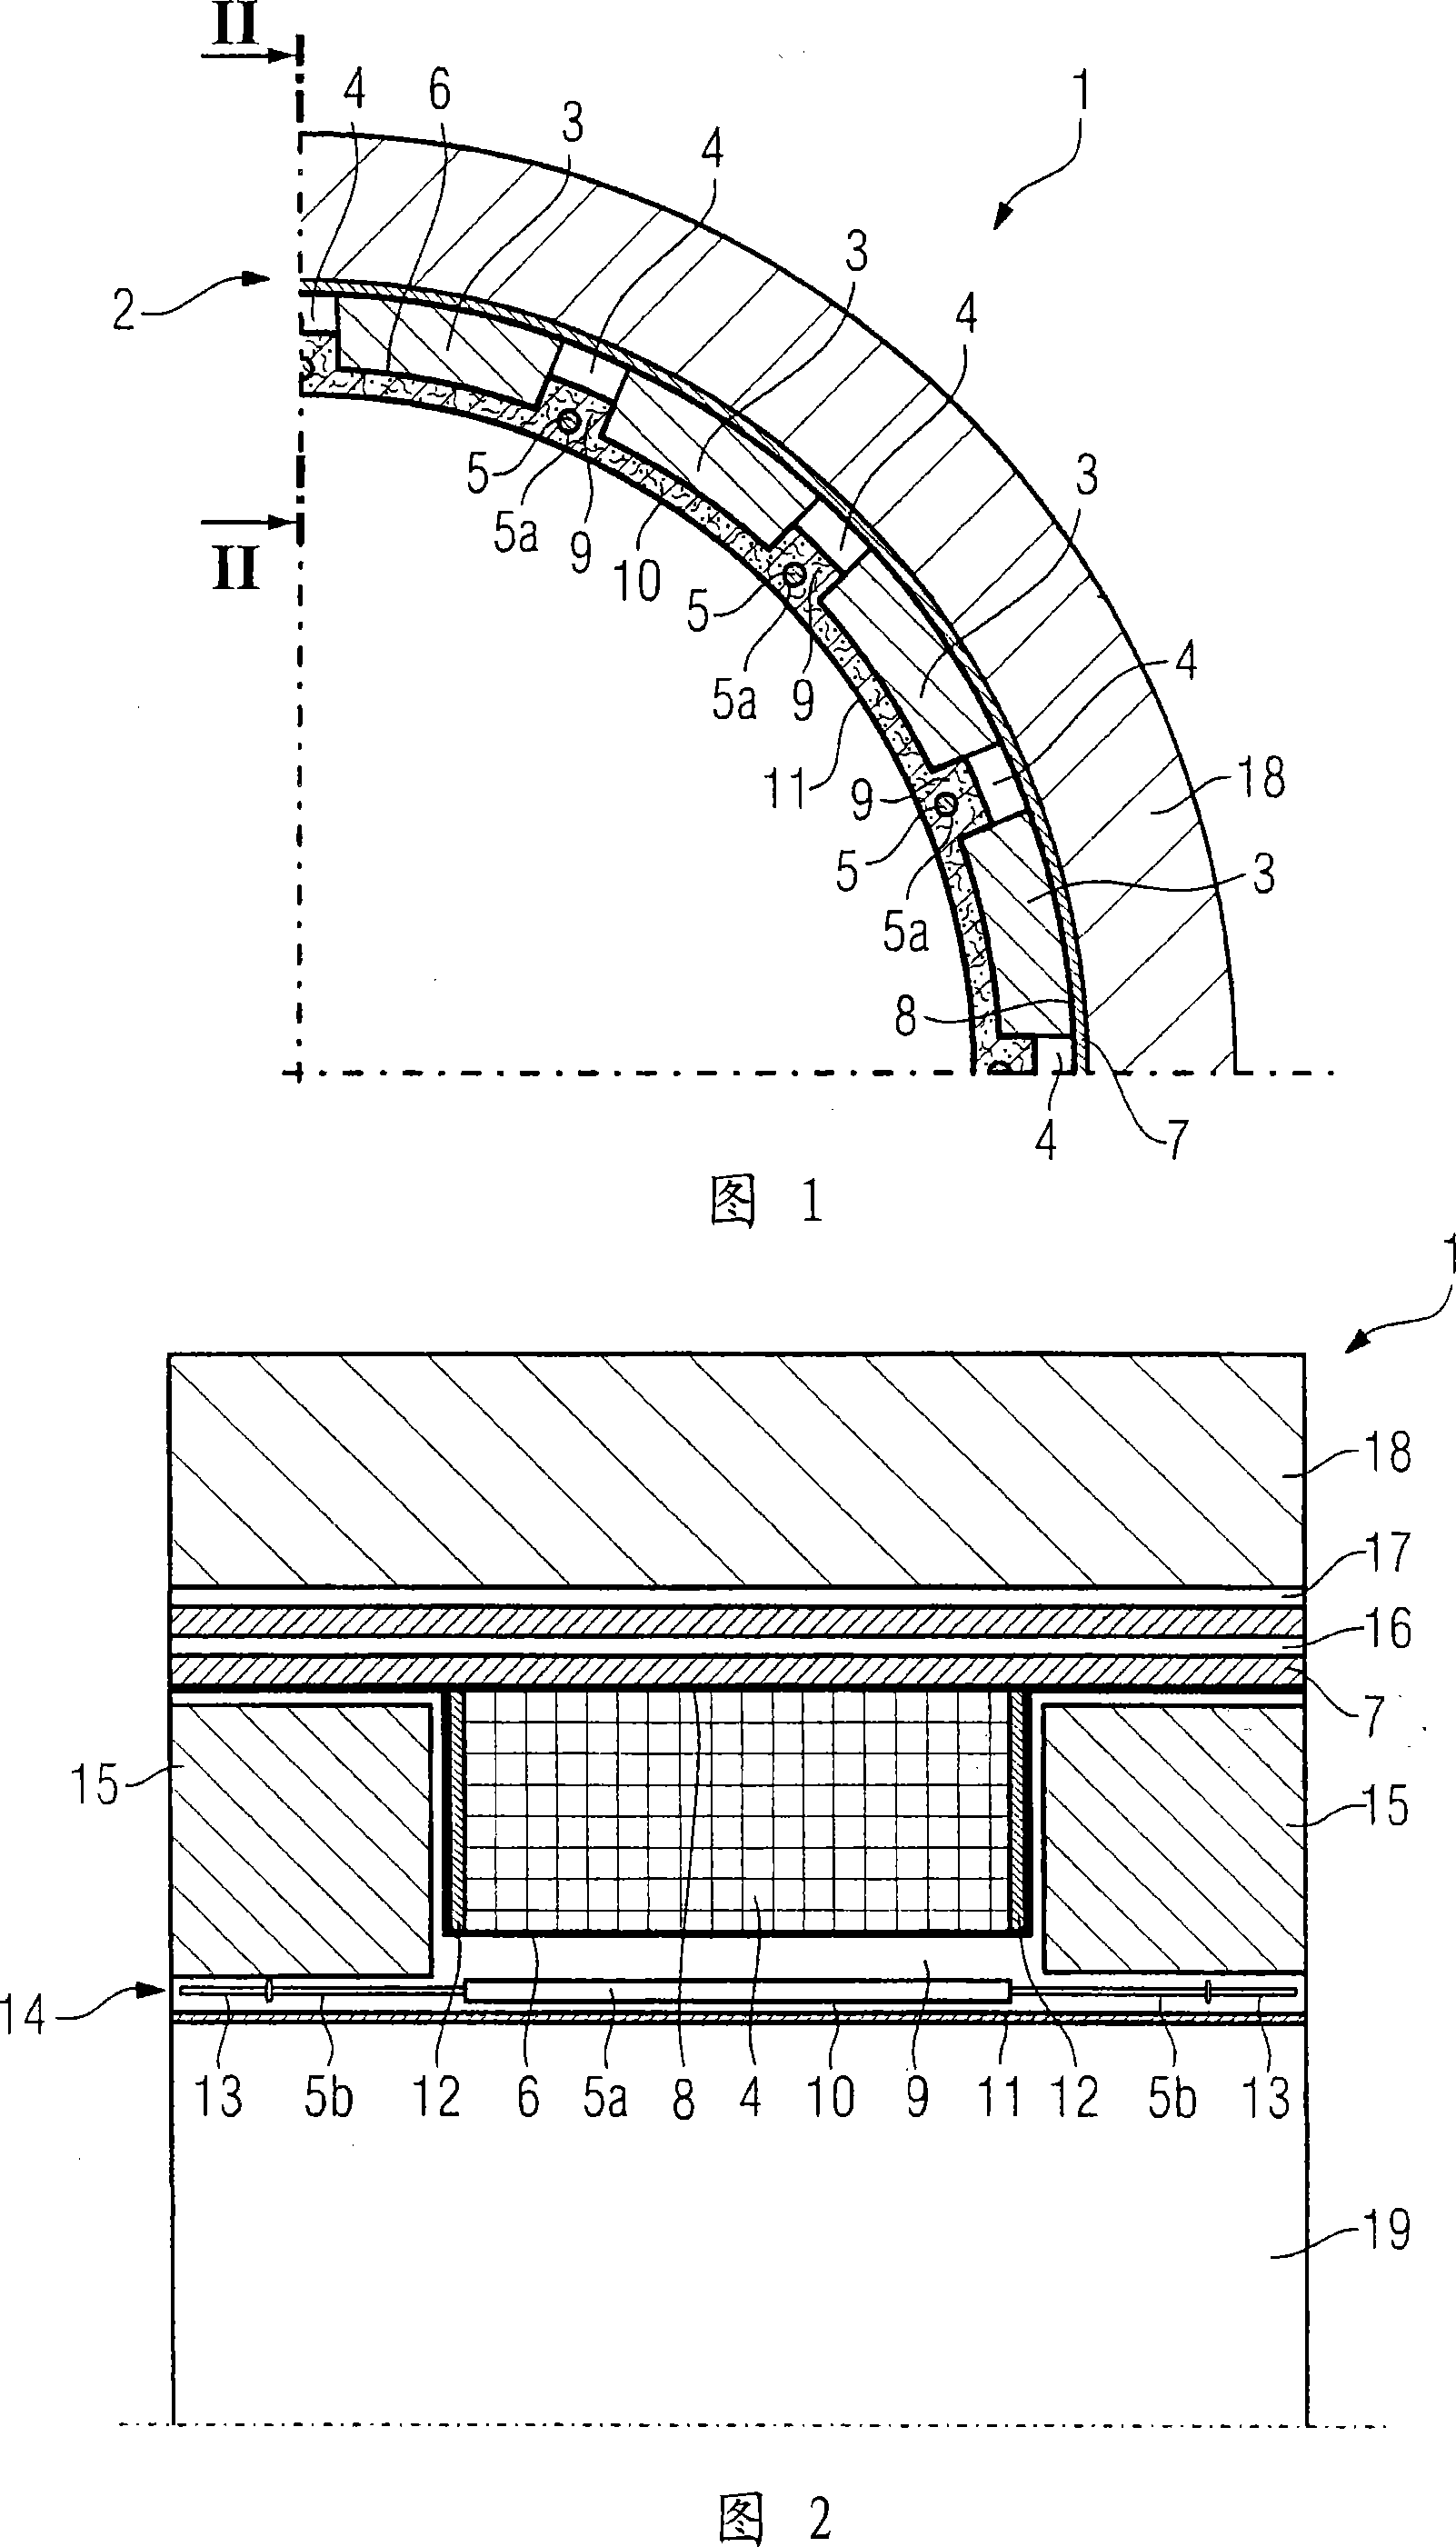 Detecting unit for mounting in cylinder type patient container cavity of magnetic resonance equipment